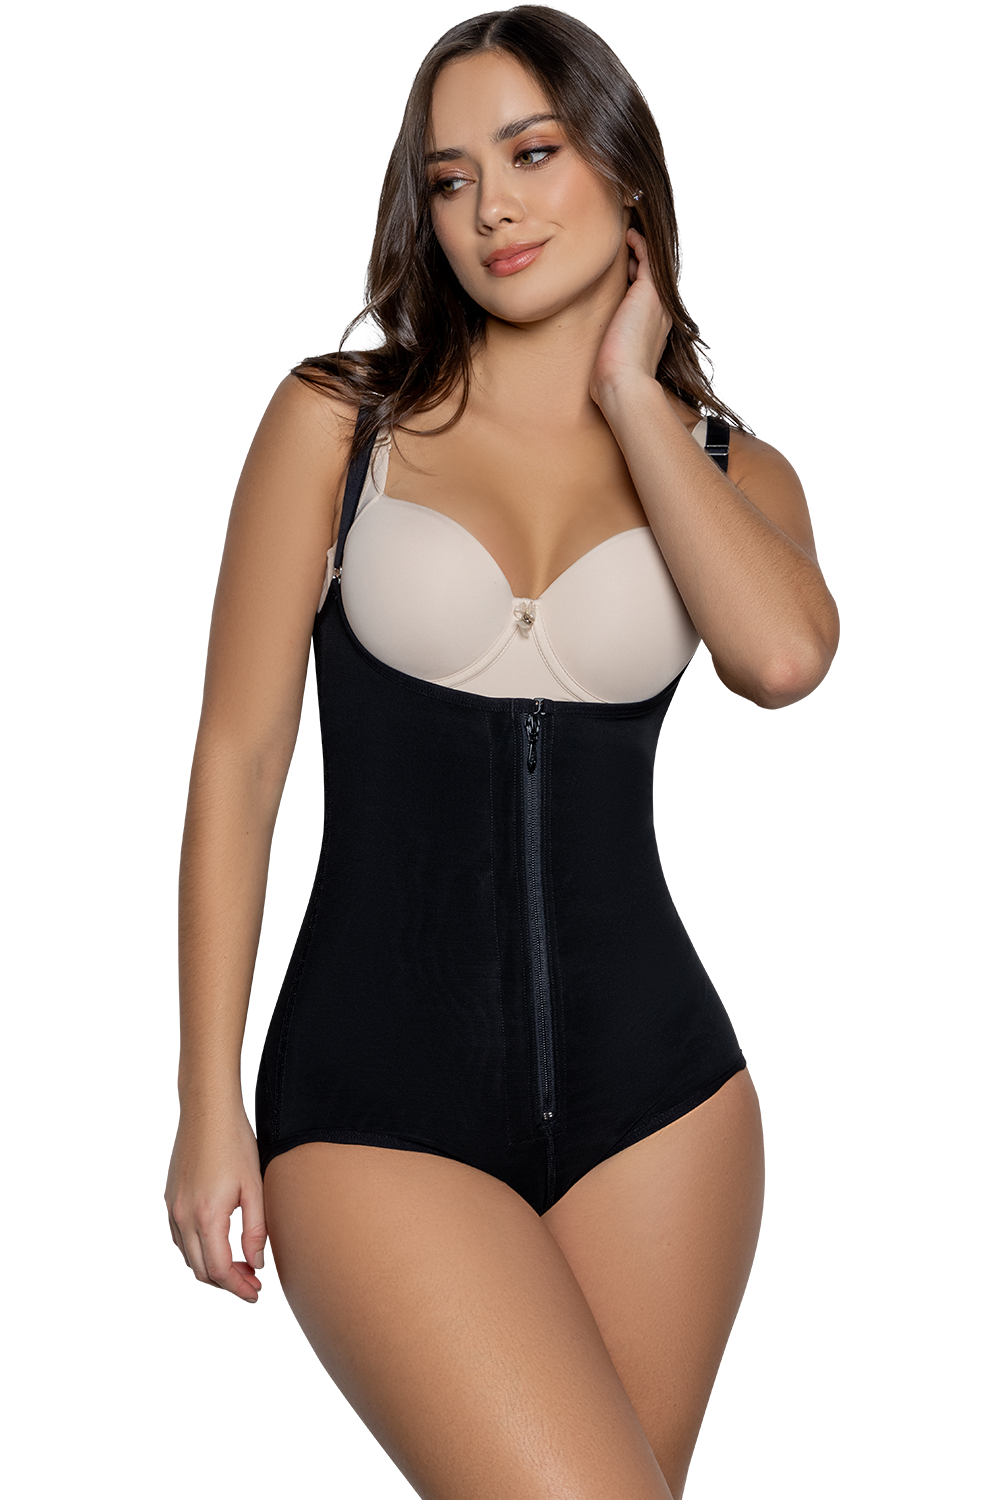 8 Strap Girdles comfortable supportive girdles for a perfect fit